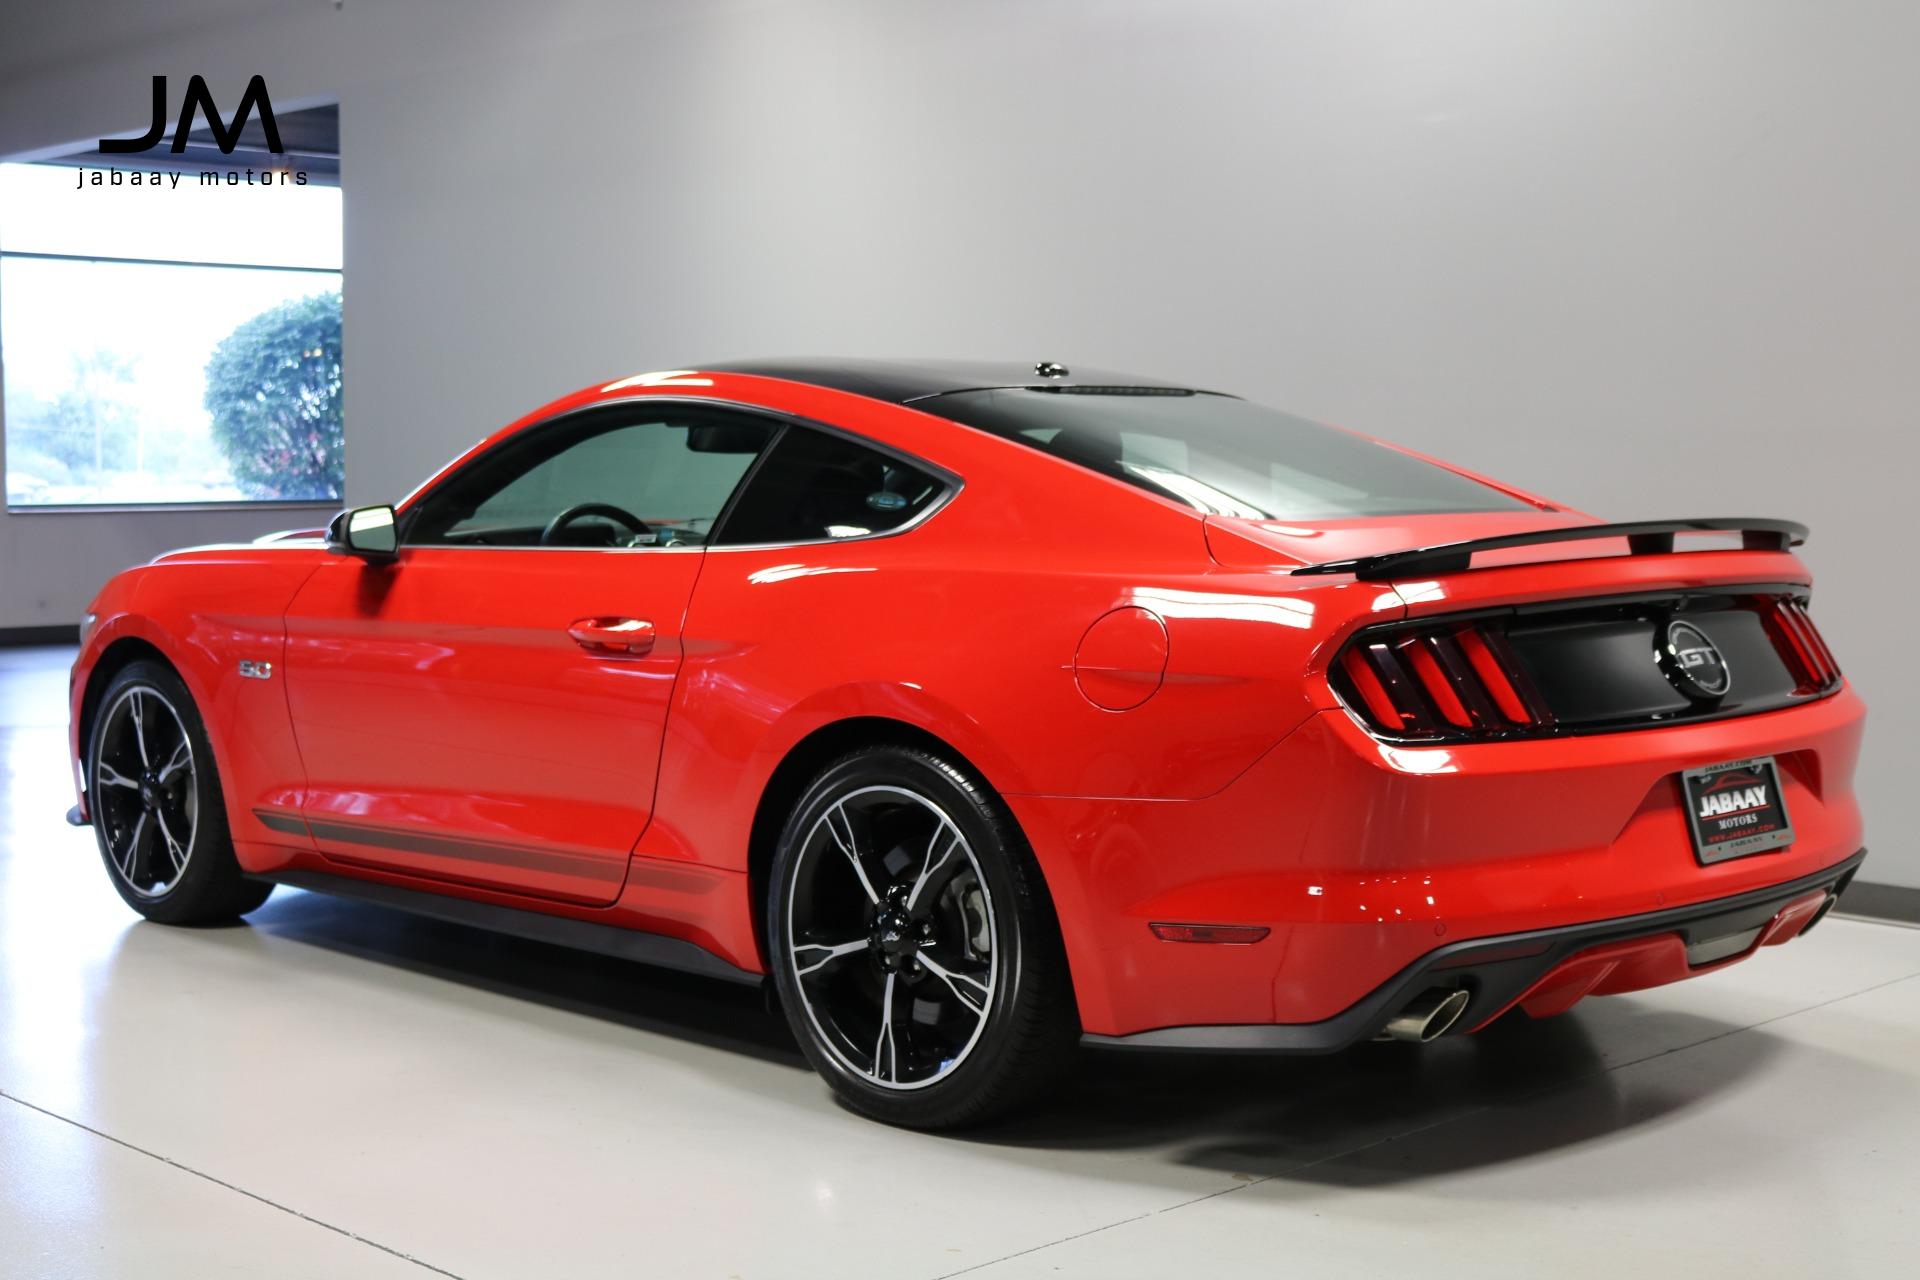 Used 2017 Ford Mustang GT Premium California Special For Sale (Sold) |  Jabaay Motors Inc Stock #JM7408